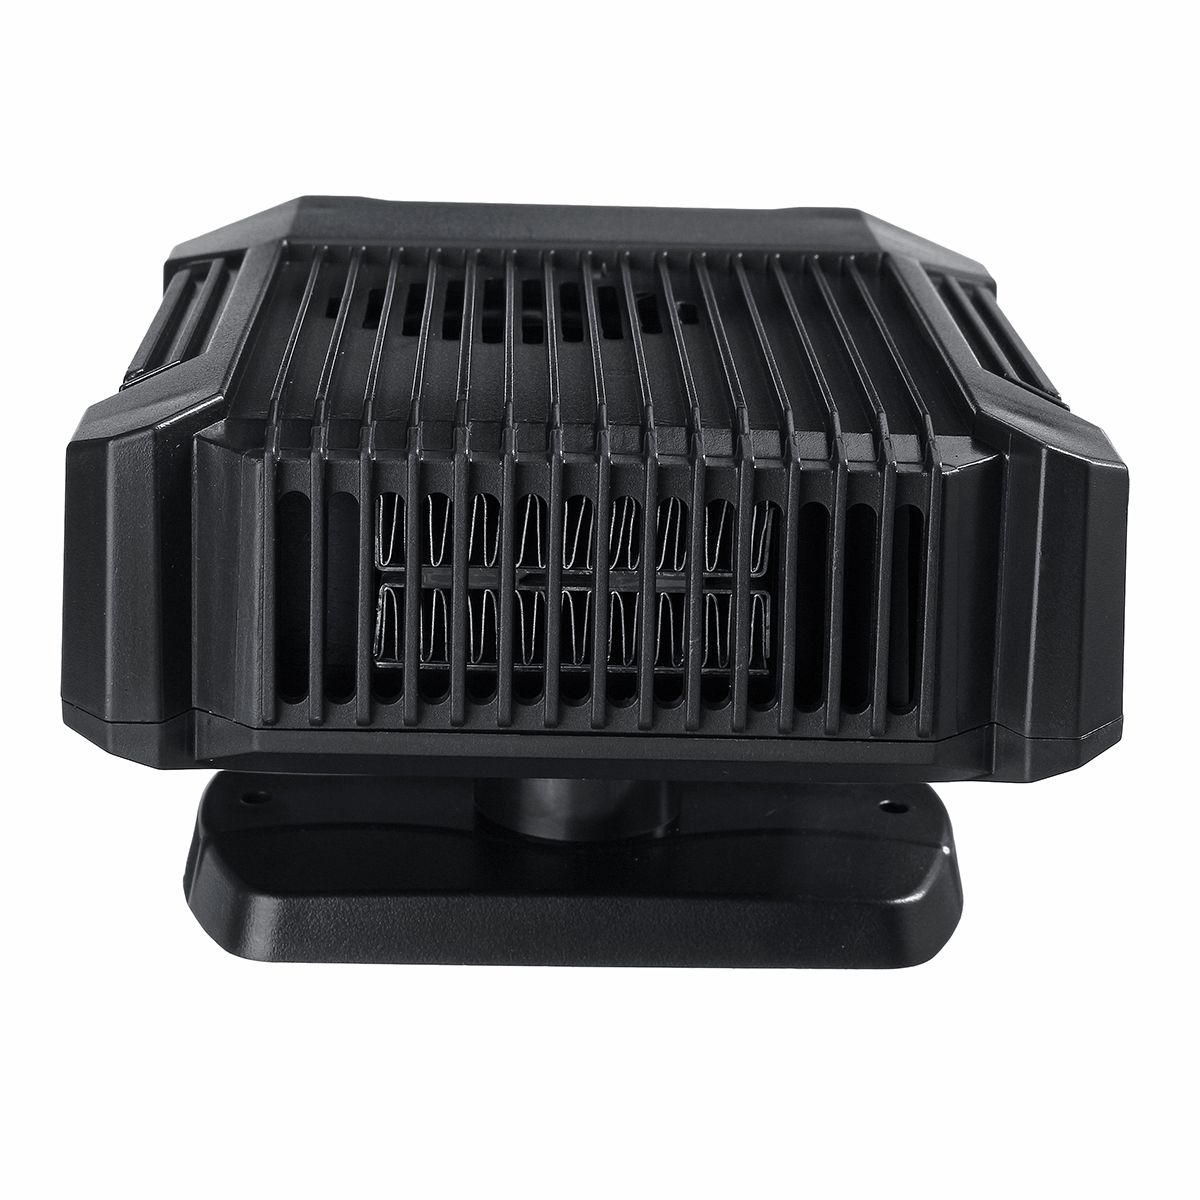 12V-150W-2in-1-Car-Air-Heater-Auto-Cooling-Fan-Defrost-Defogging-Portable-1634965